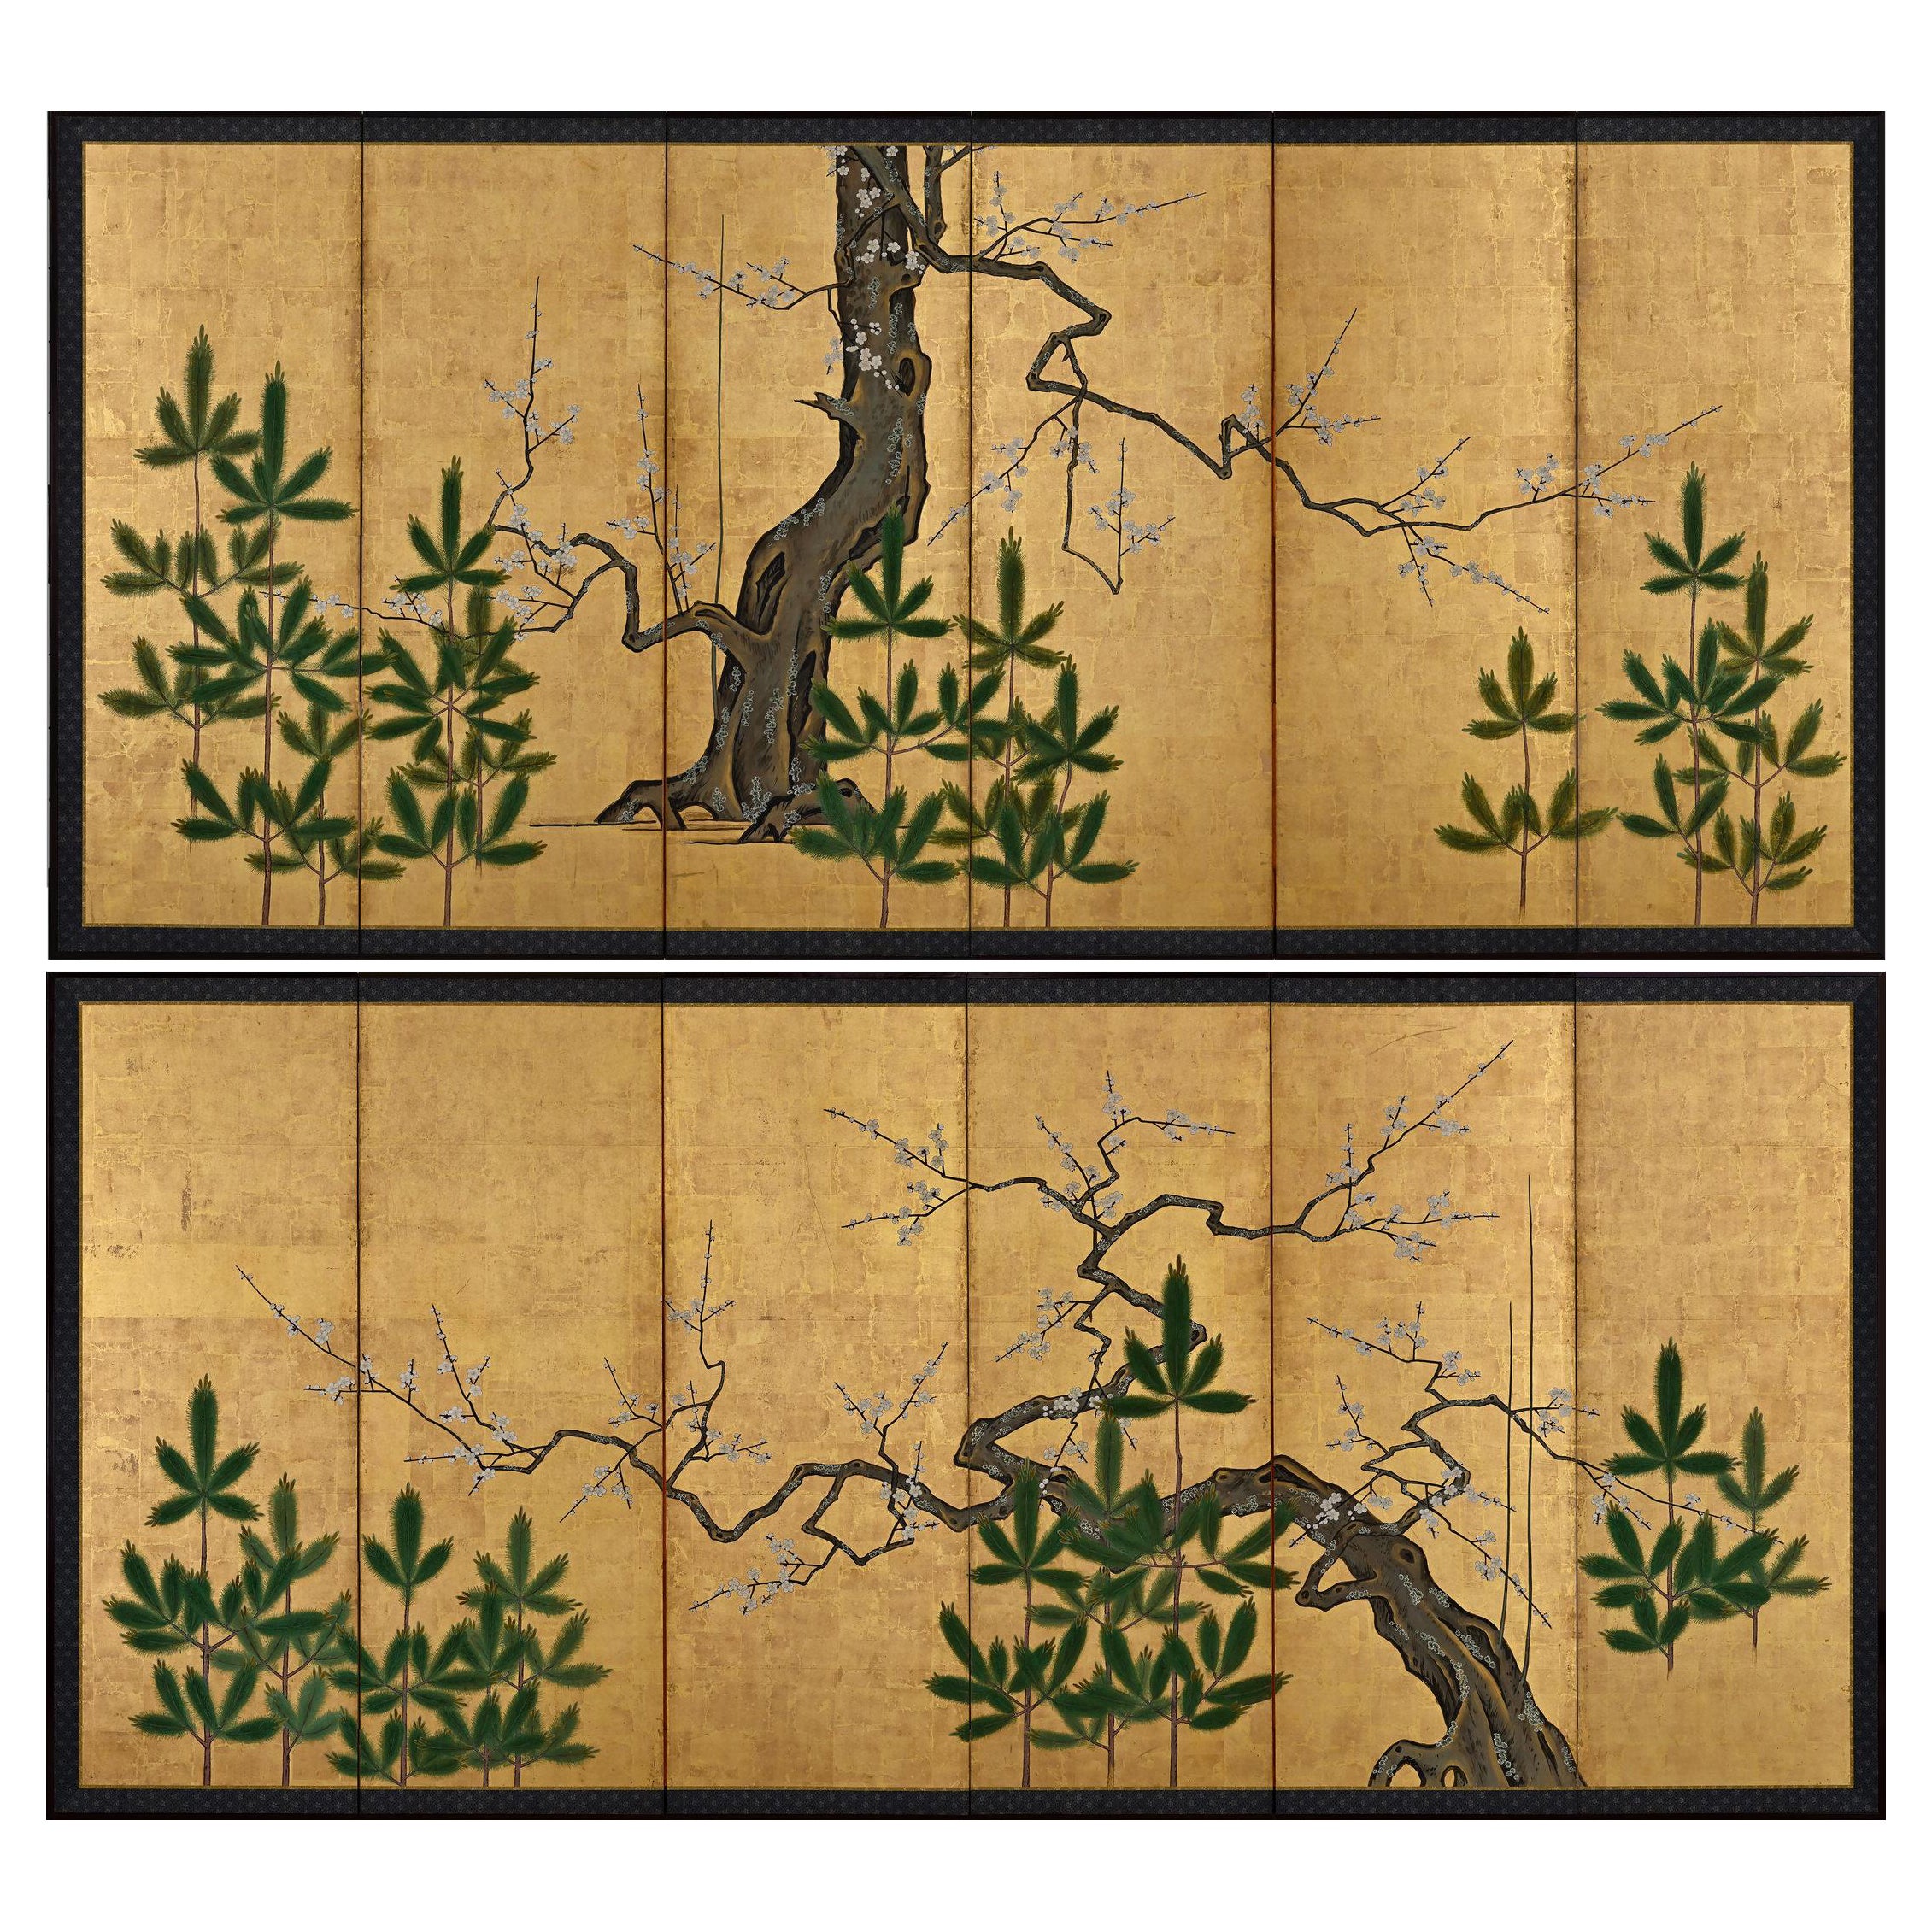 18th Century Japanese Screen Pair. Plum & Young Pines. Kano School.